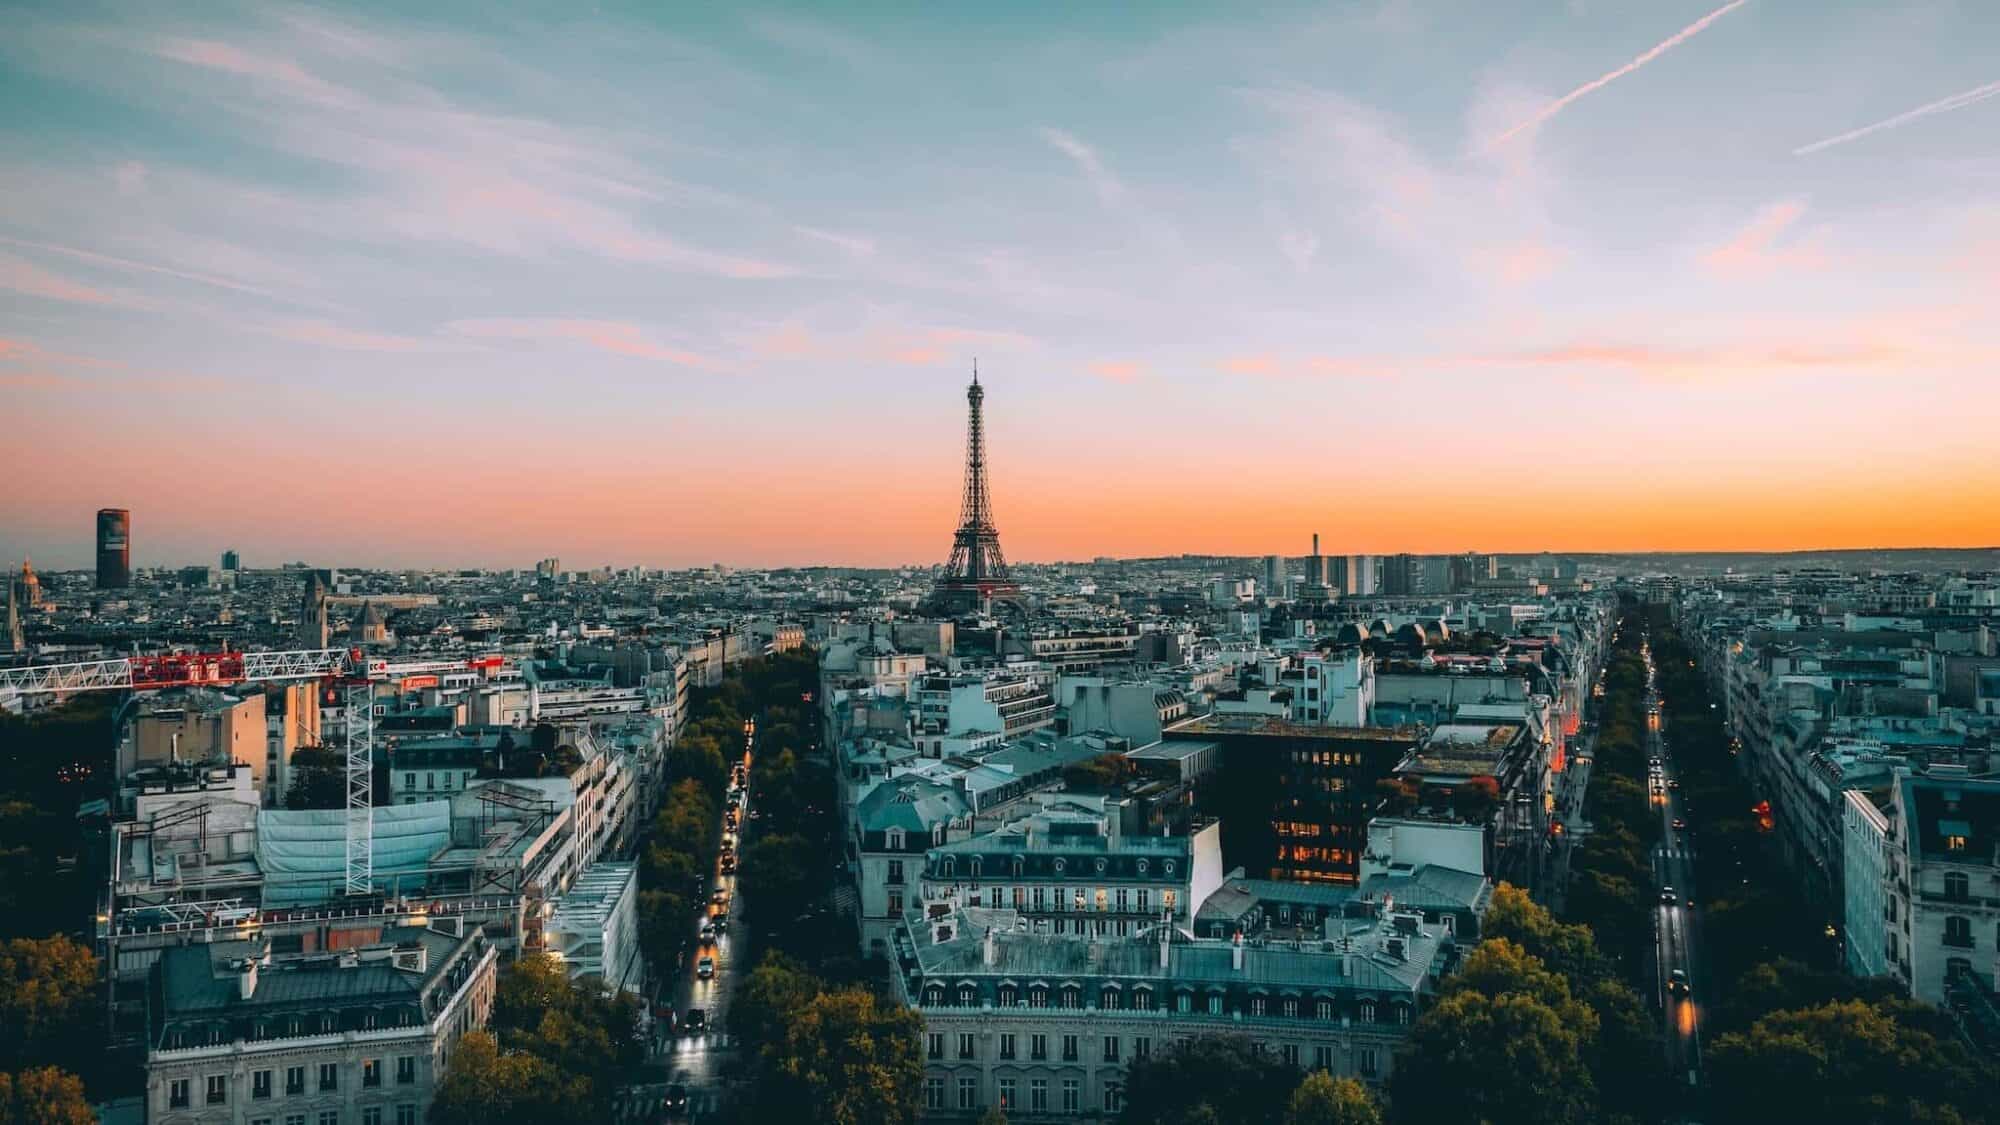 View of the Eiffel Tower at sunset.